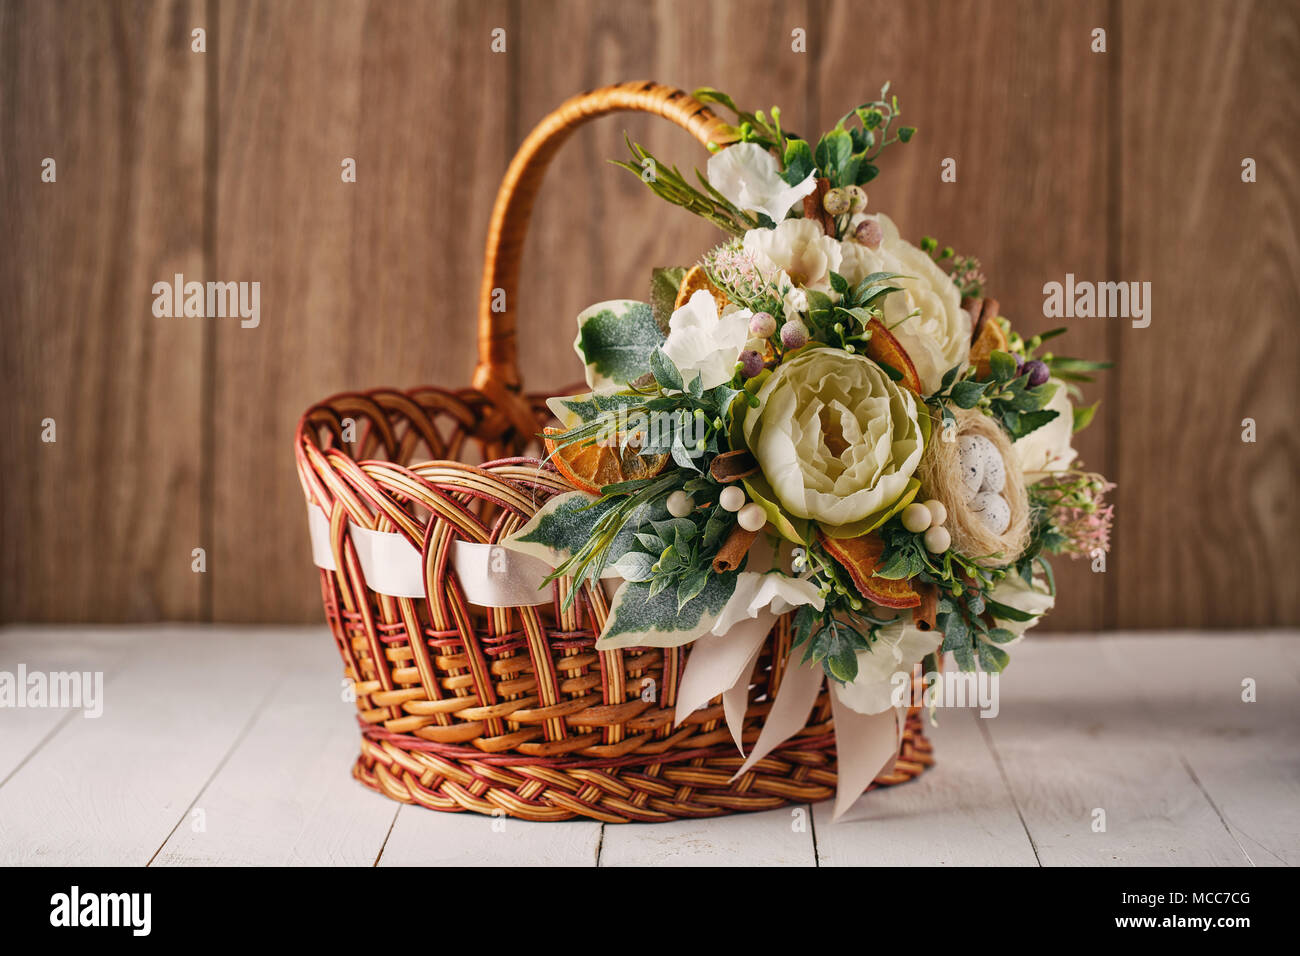 handmade bamboo basket decorated with flowers Stock Photo